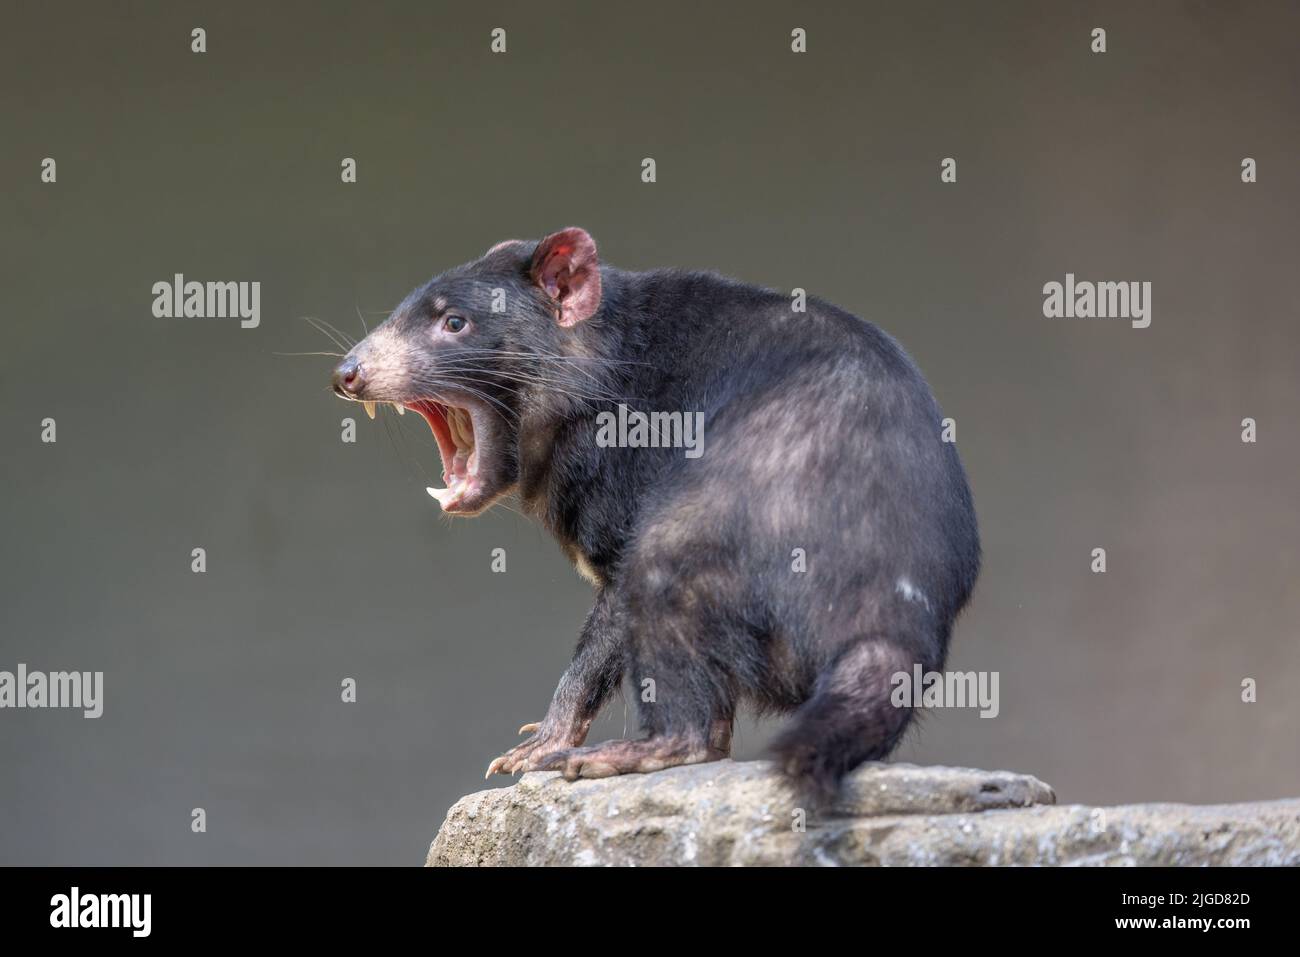 Tasmanian Devil (Sarcophilus harrisii) with mouth wide open, displaying teeth and tongue, in aggressive mood. Stock Photo